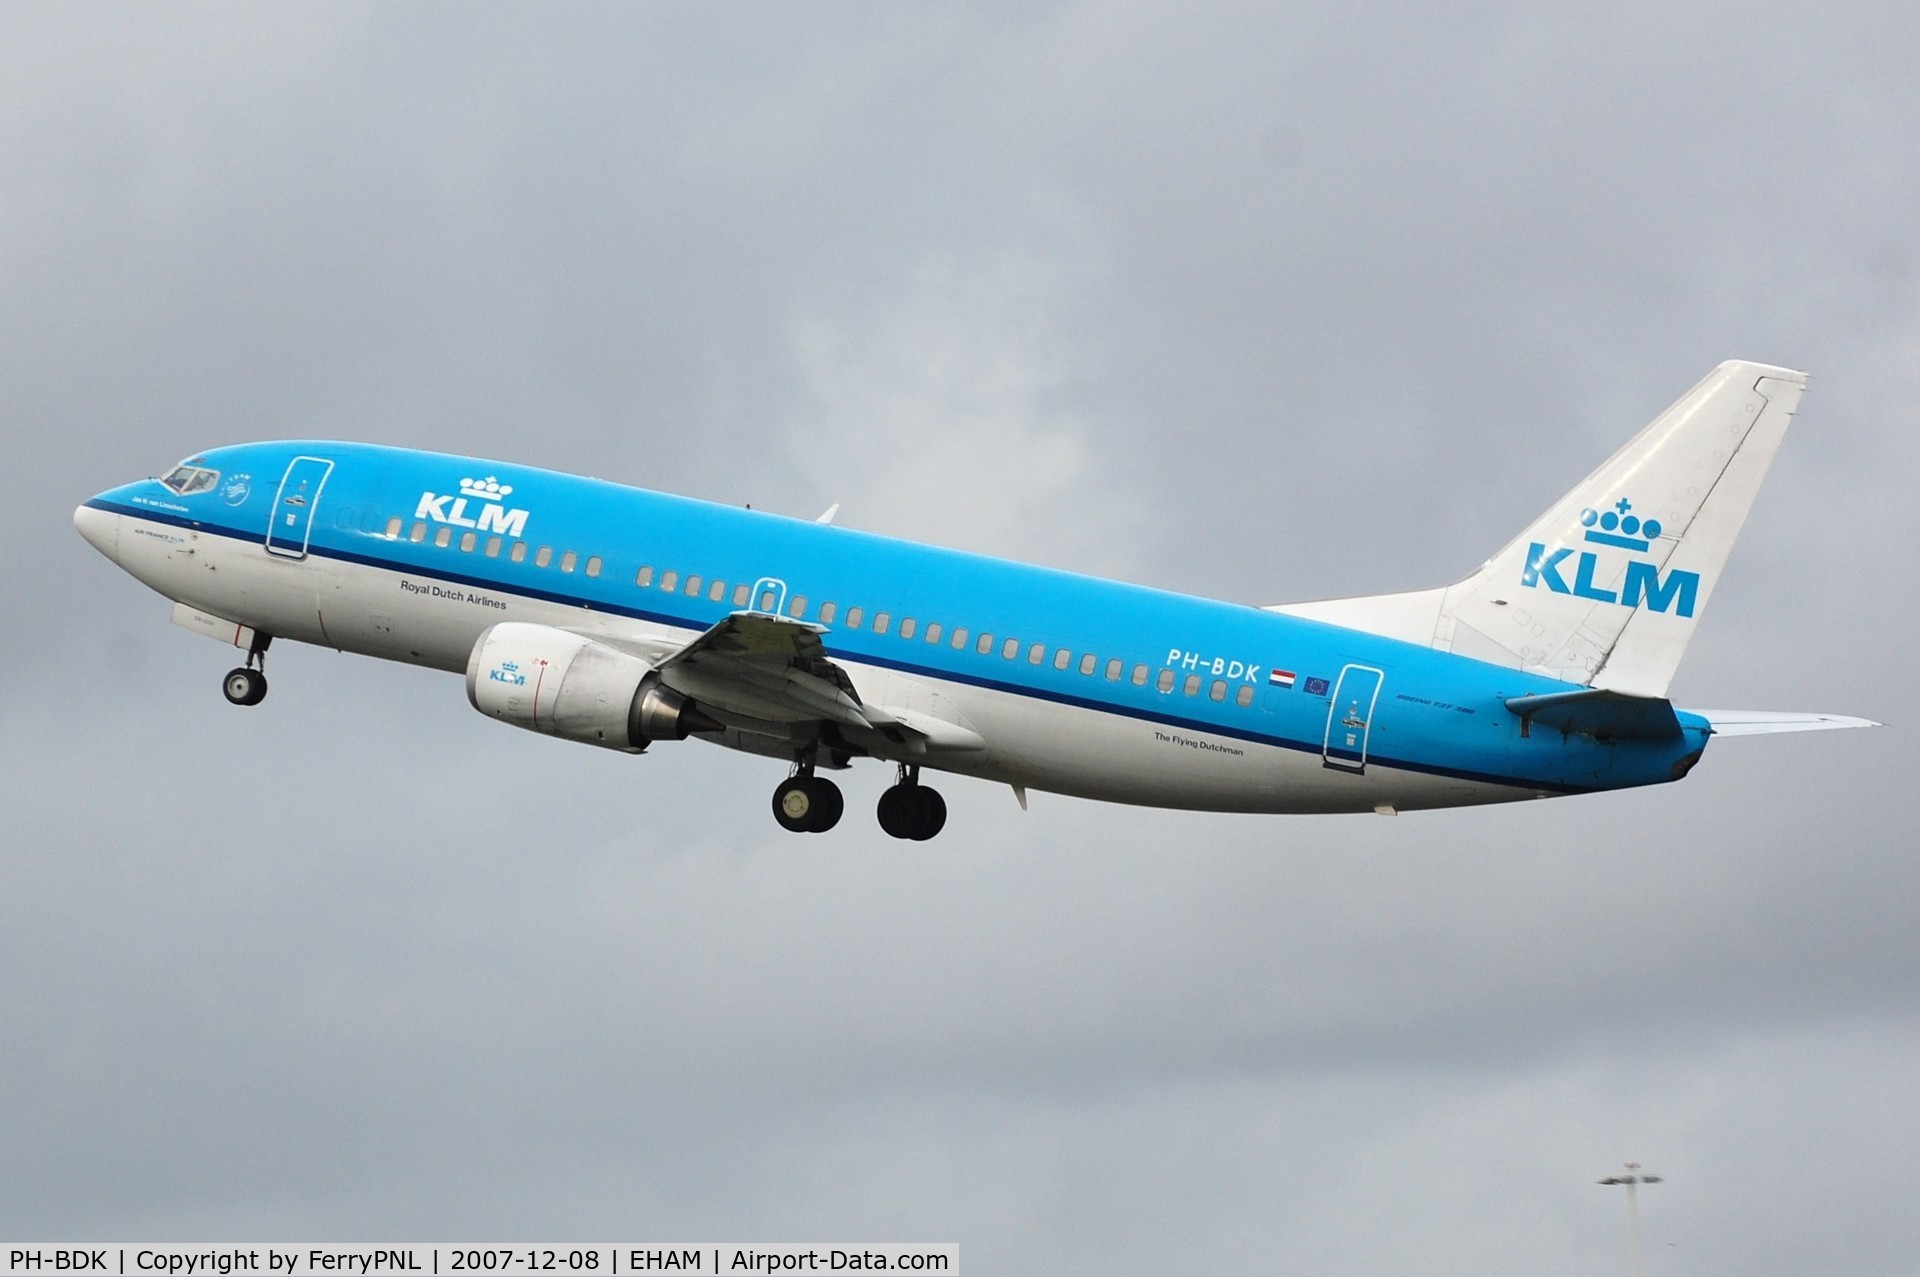 PH-BDK, Boeing 737-306 C/N 23545, KLM B733 ended as a fire trainer in Ostrava.